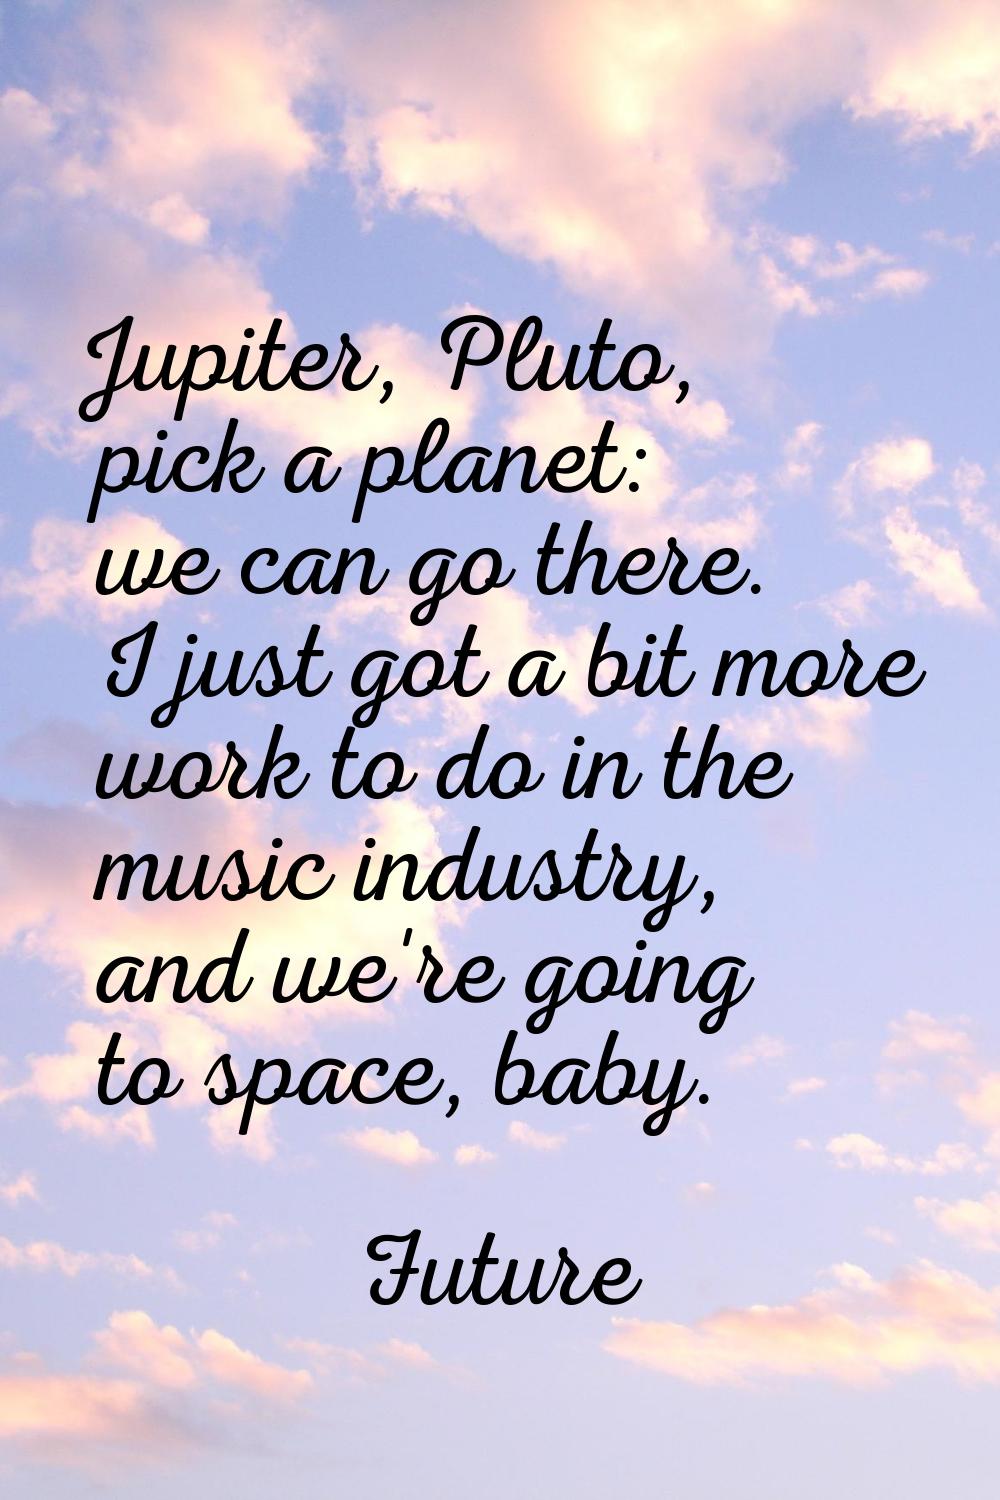 Jupiter, Pluto, pick a planet: we can go there. I just got a bit more work to do in the music indus